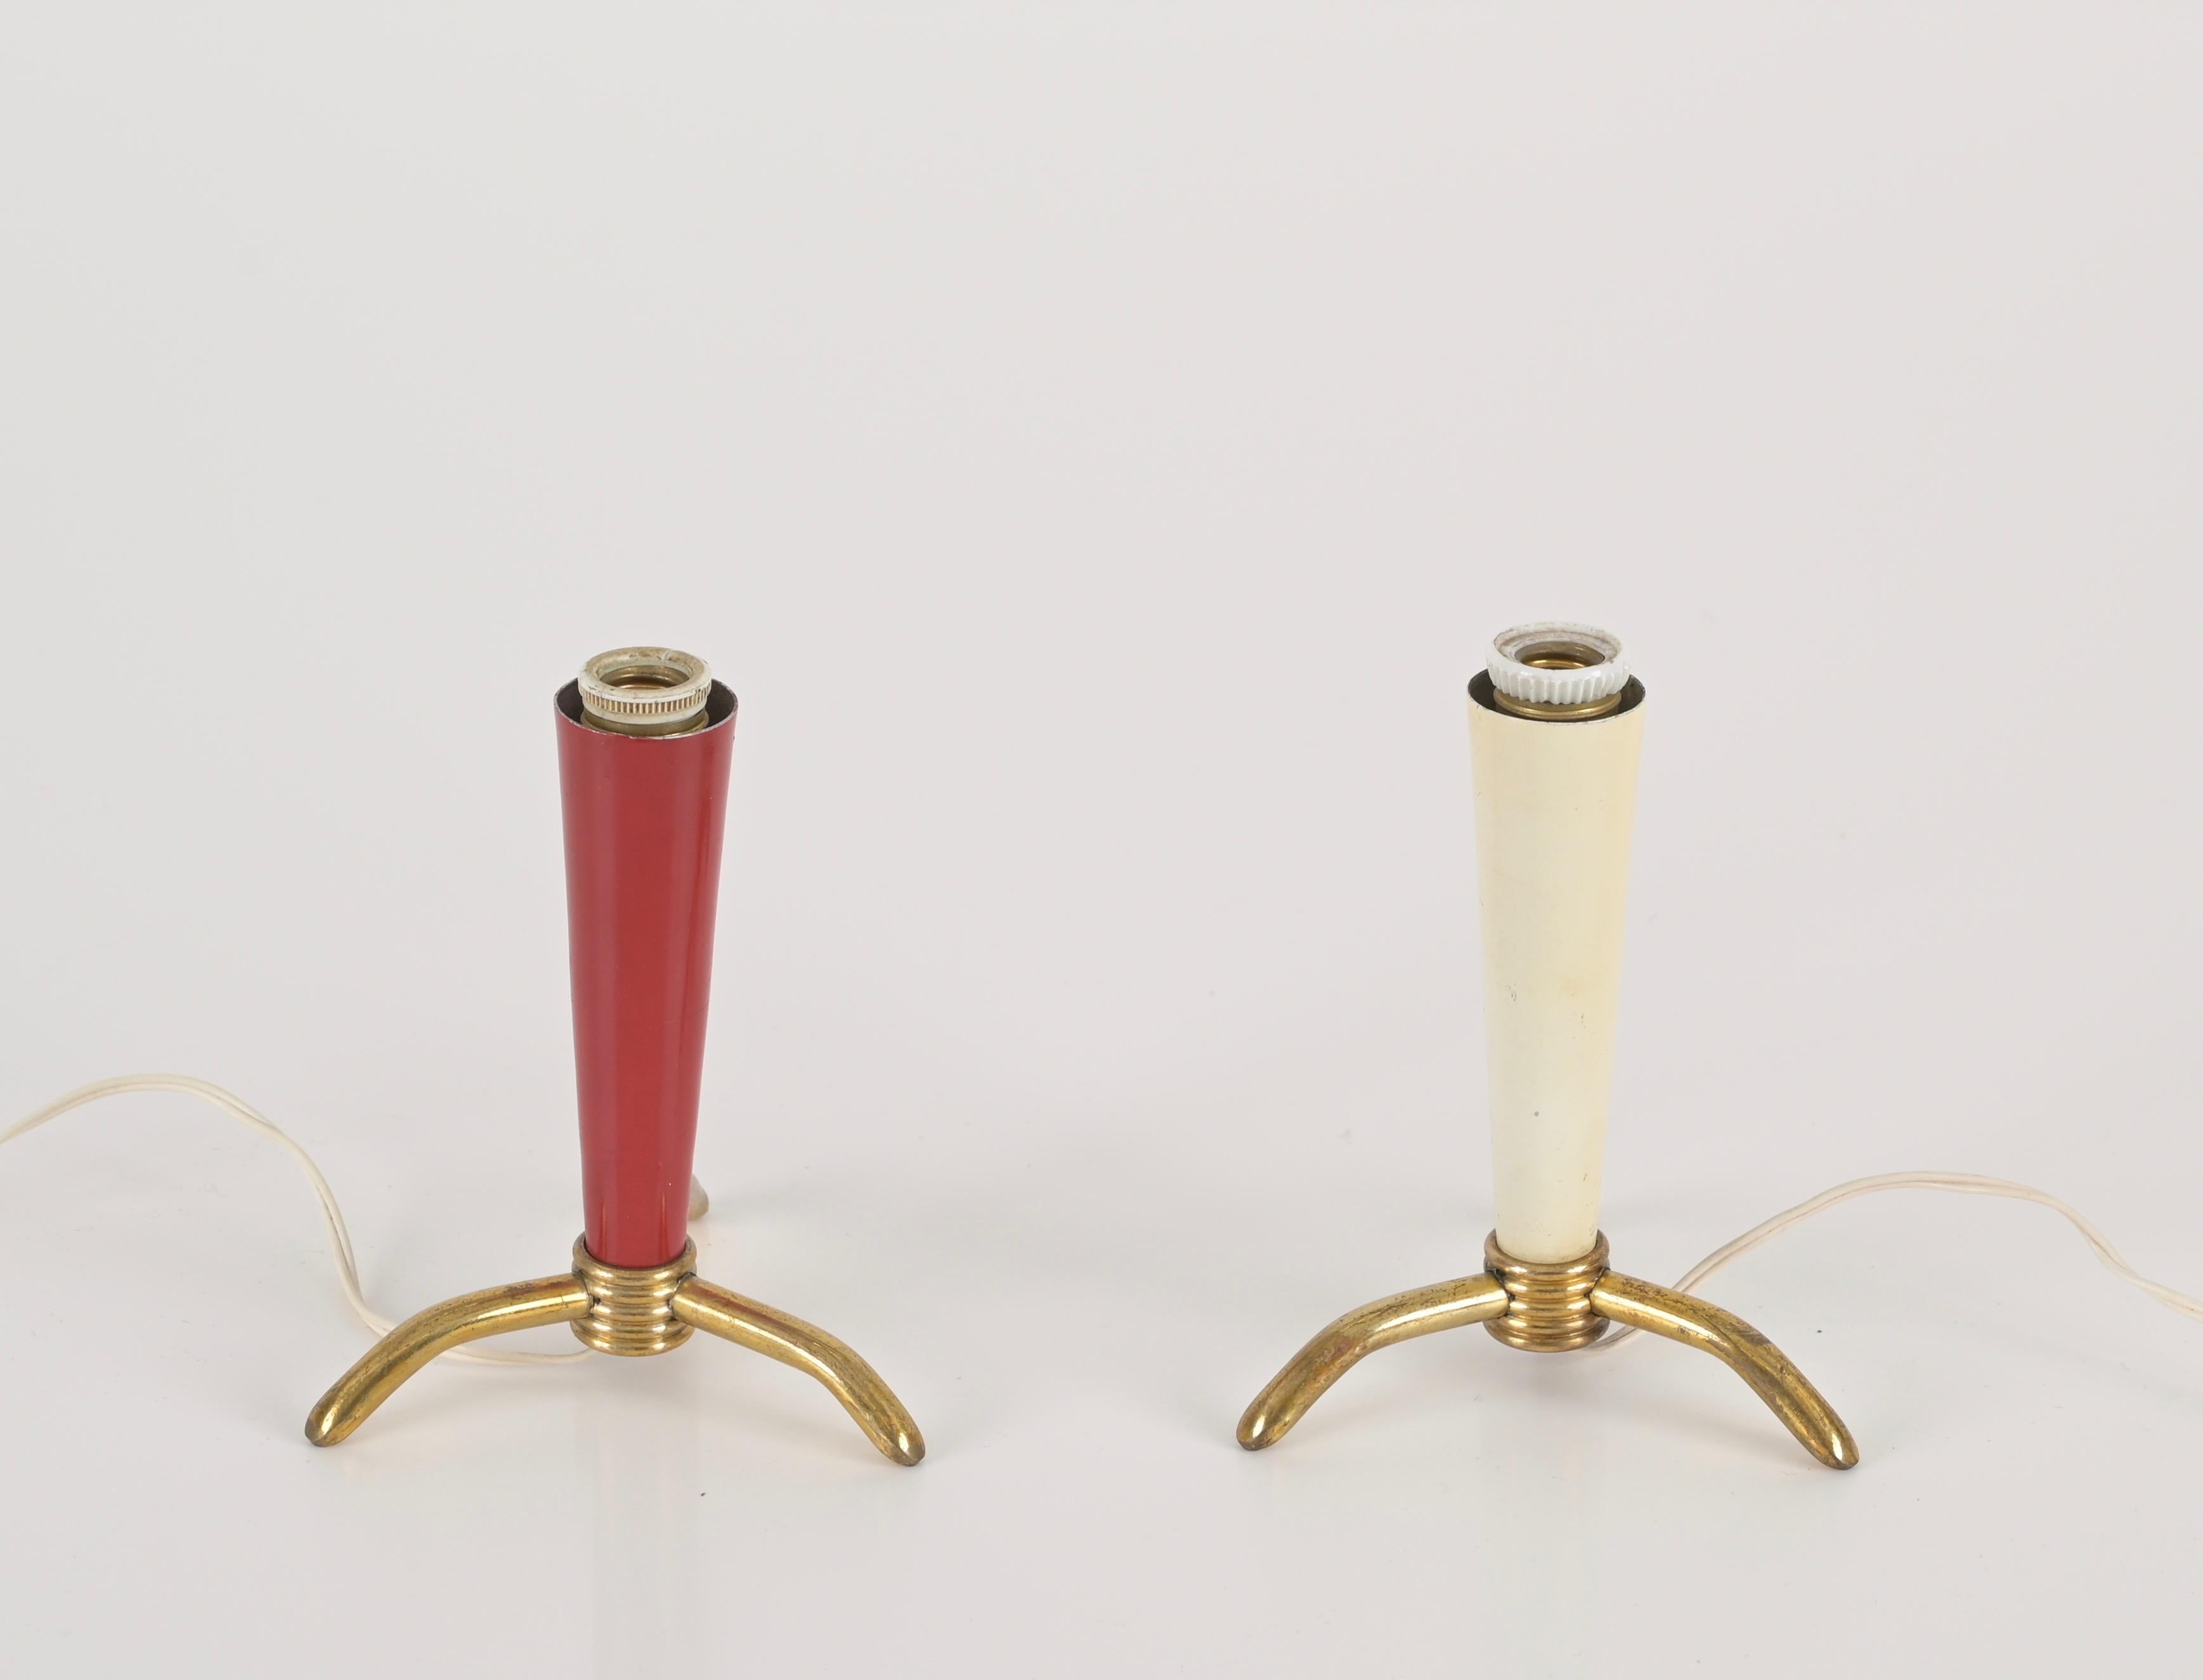 Pairs of Italian Table Lamps in Brass, Red and Ivory Metal, Stilnovo, 1950s For Sale 8